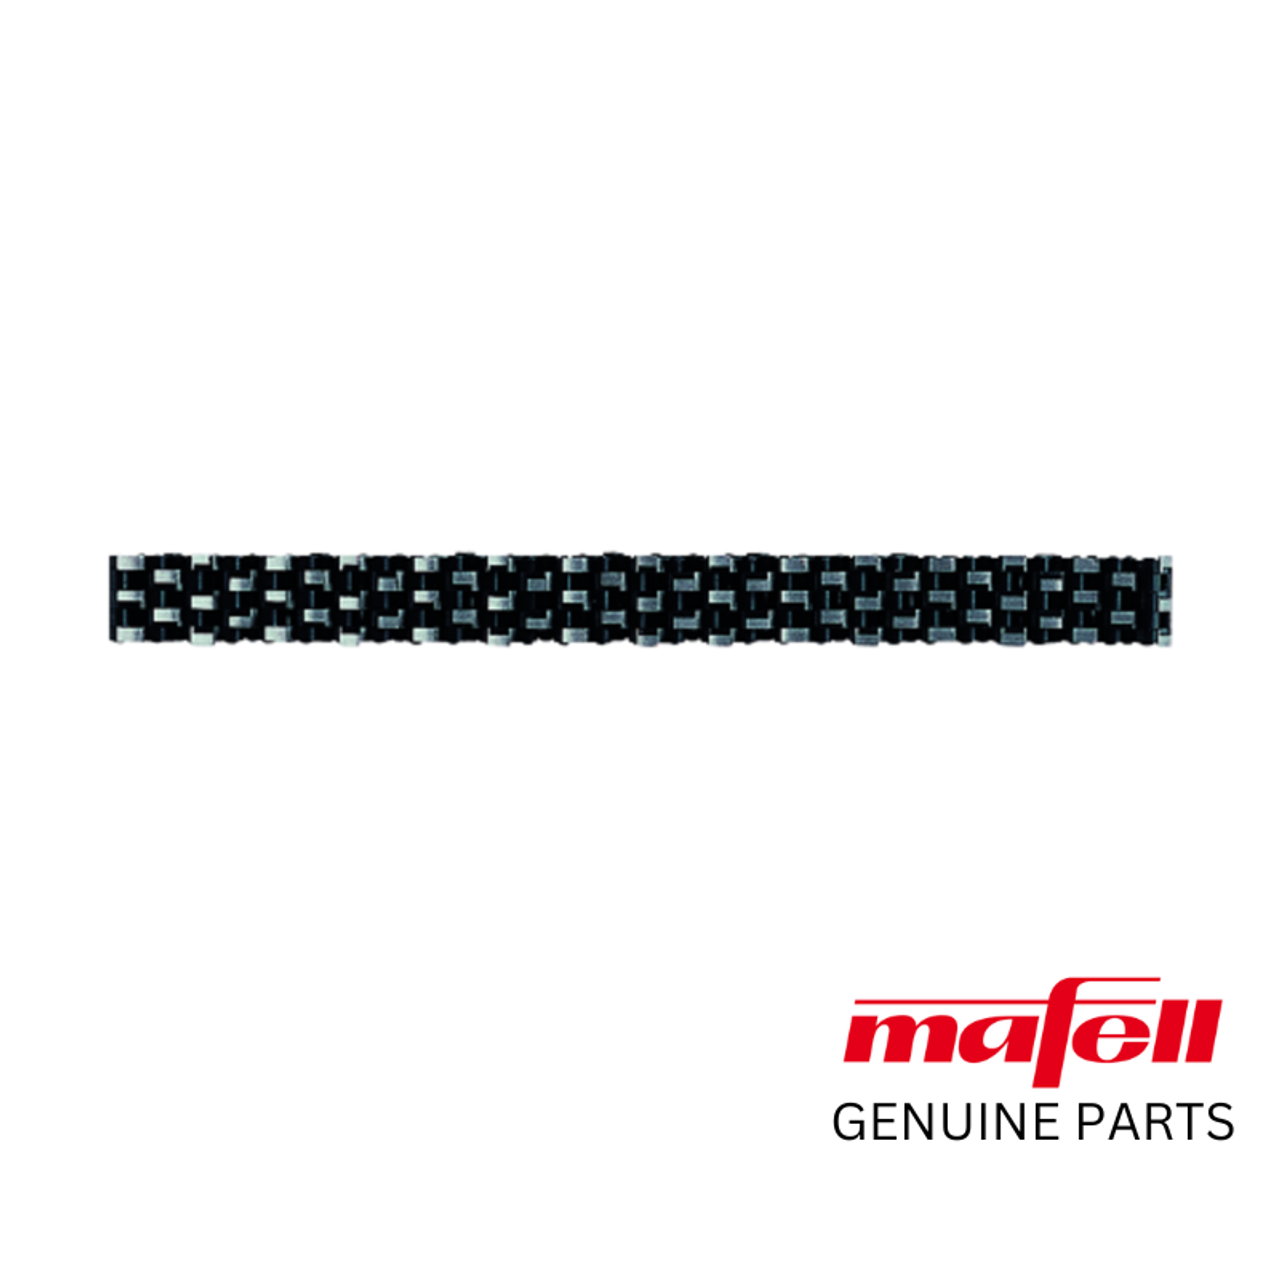 MAFELL Chain Mortiser | Supplier of Spare Chain 22.6, 28 x 35/40 x 150 mm  for LS Mortiser, Woodworking, Carpentry, Mass Timber, Mortising and Woodworking